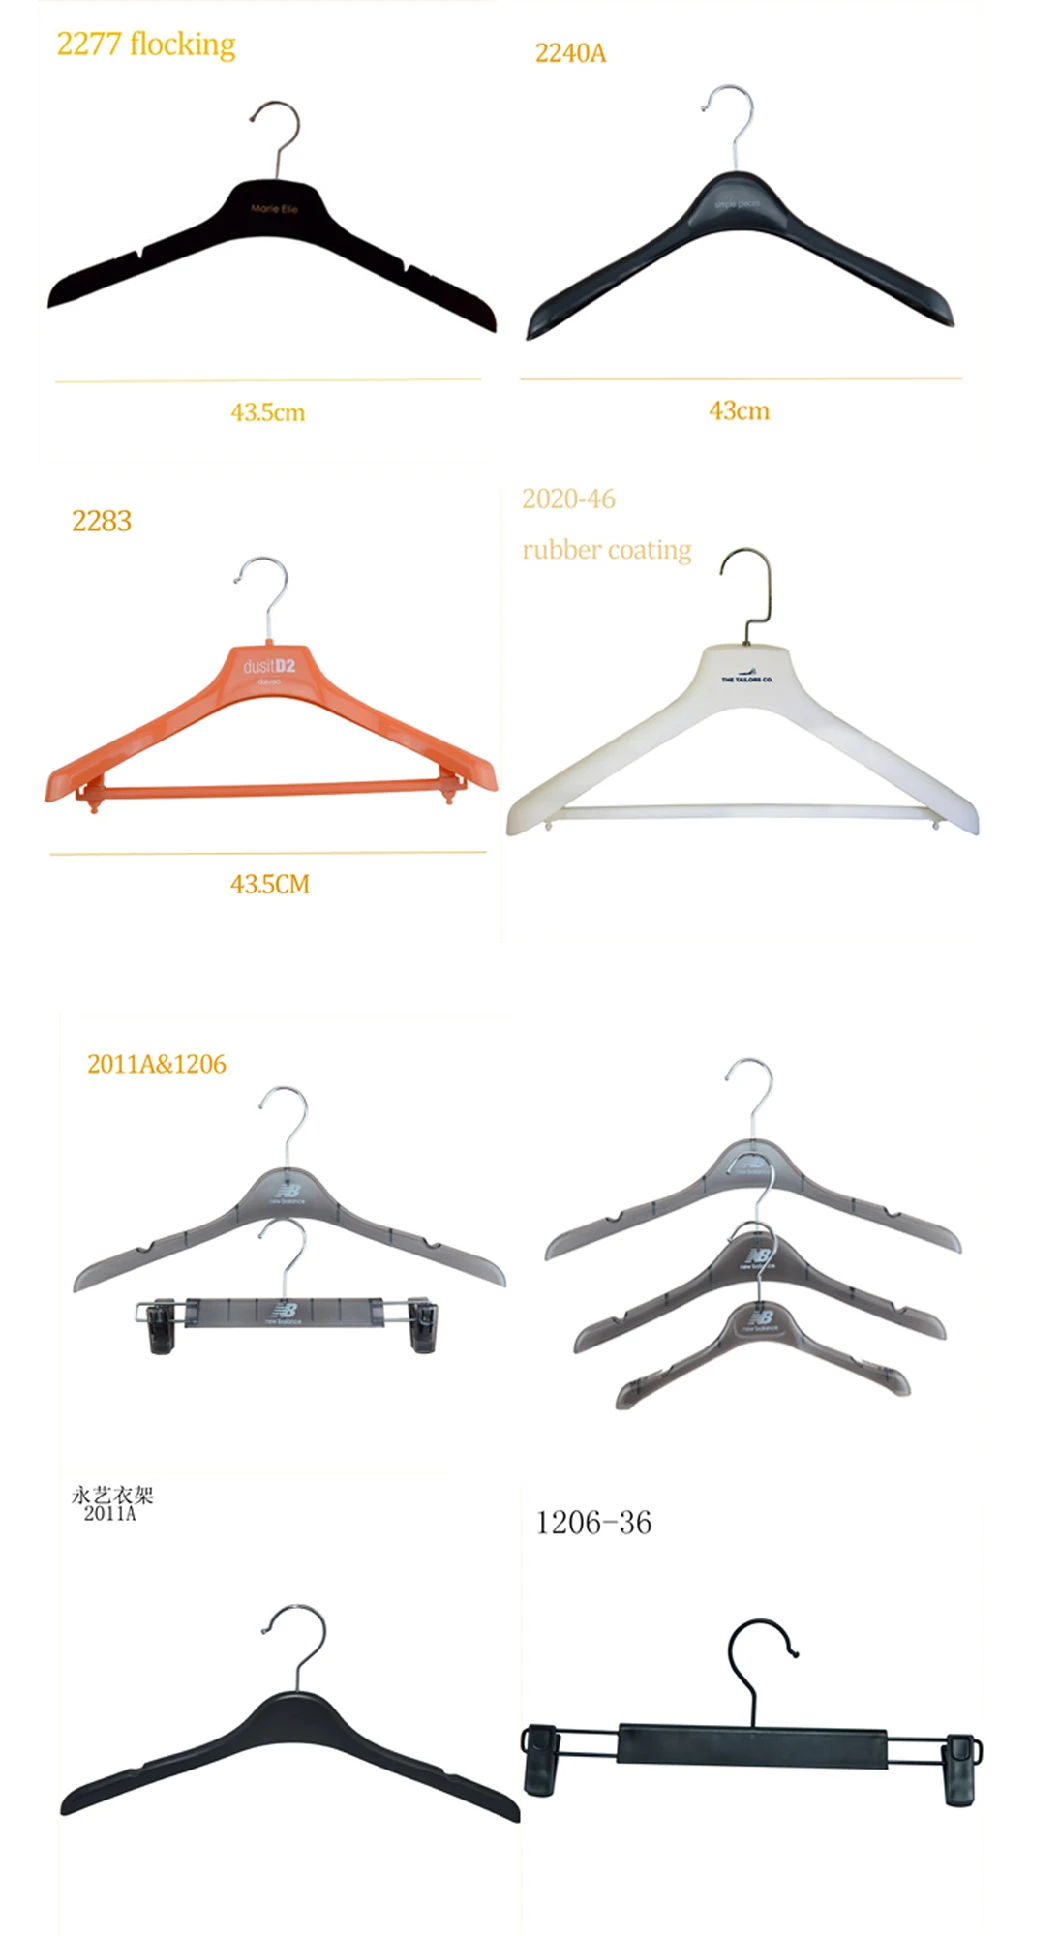 Translucence Gray Hangers Clothes Men Hangers with Non-Slip